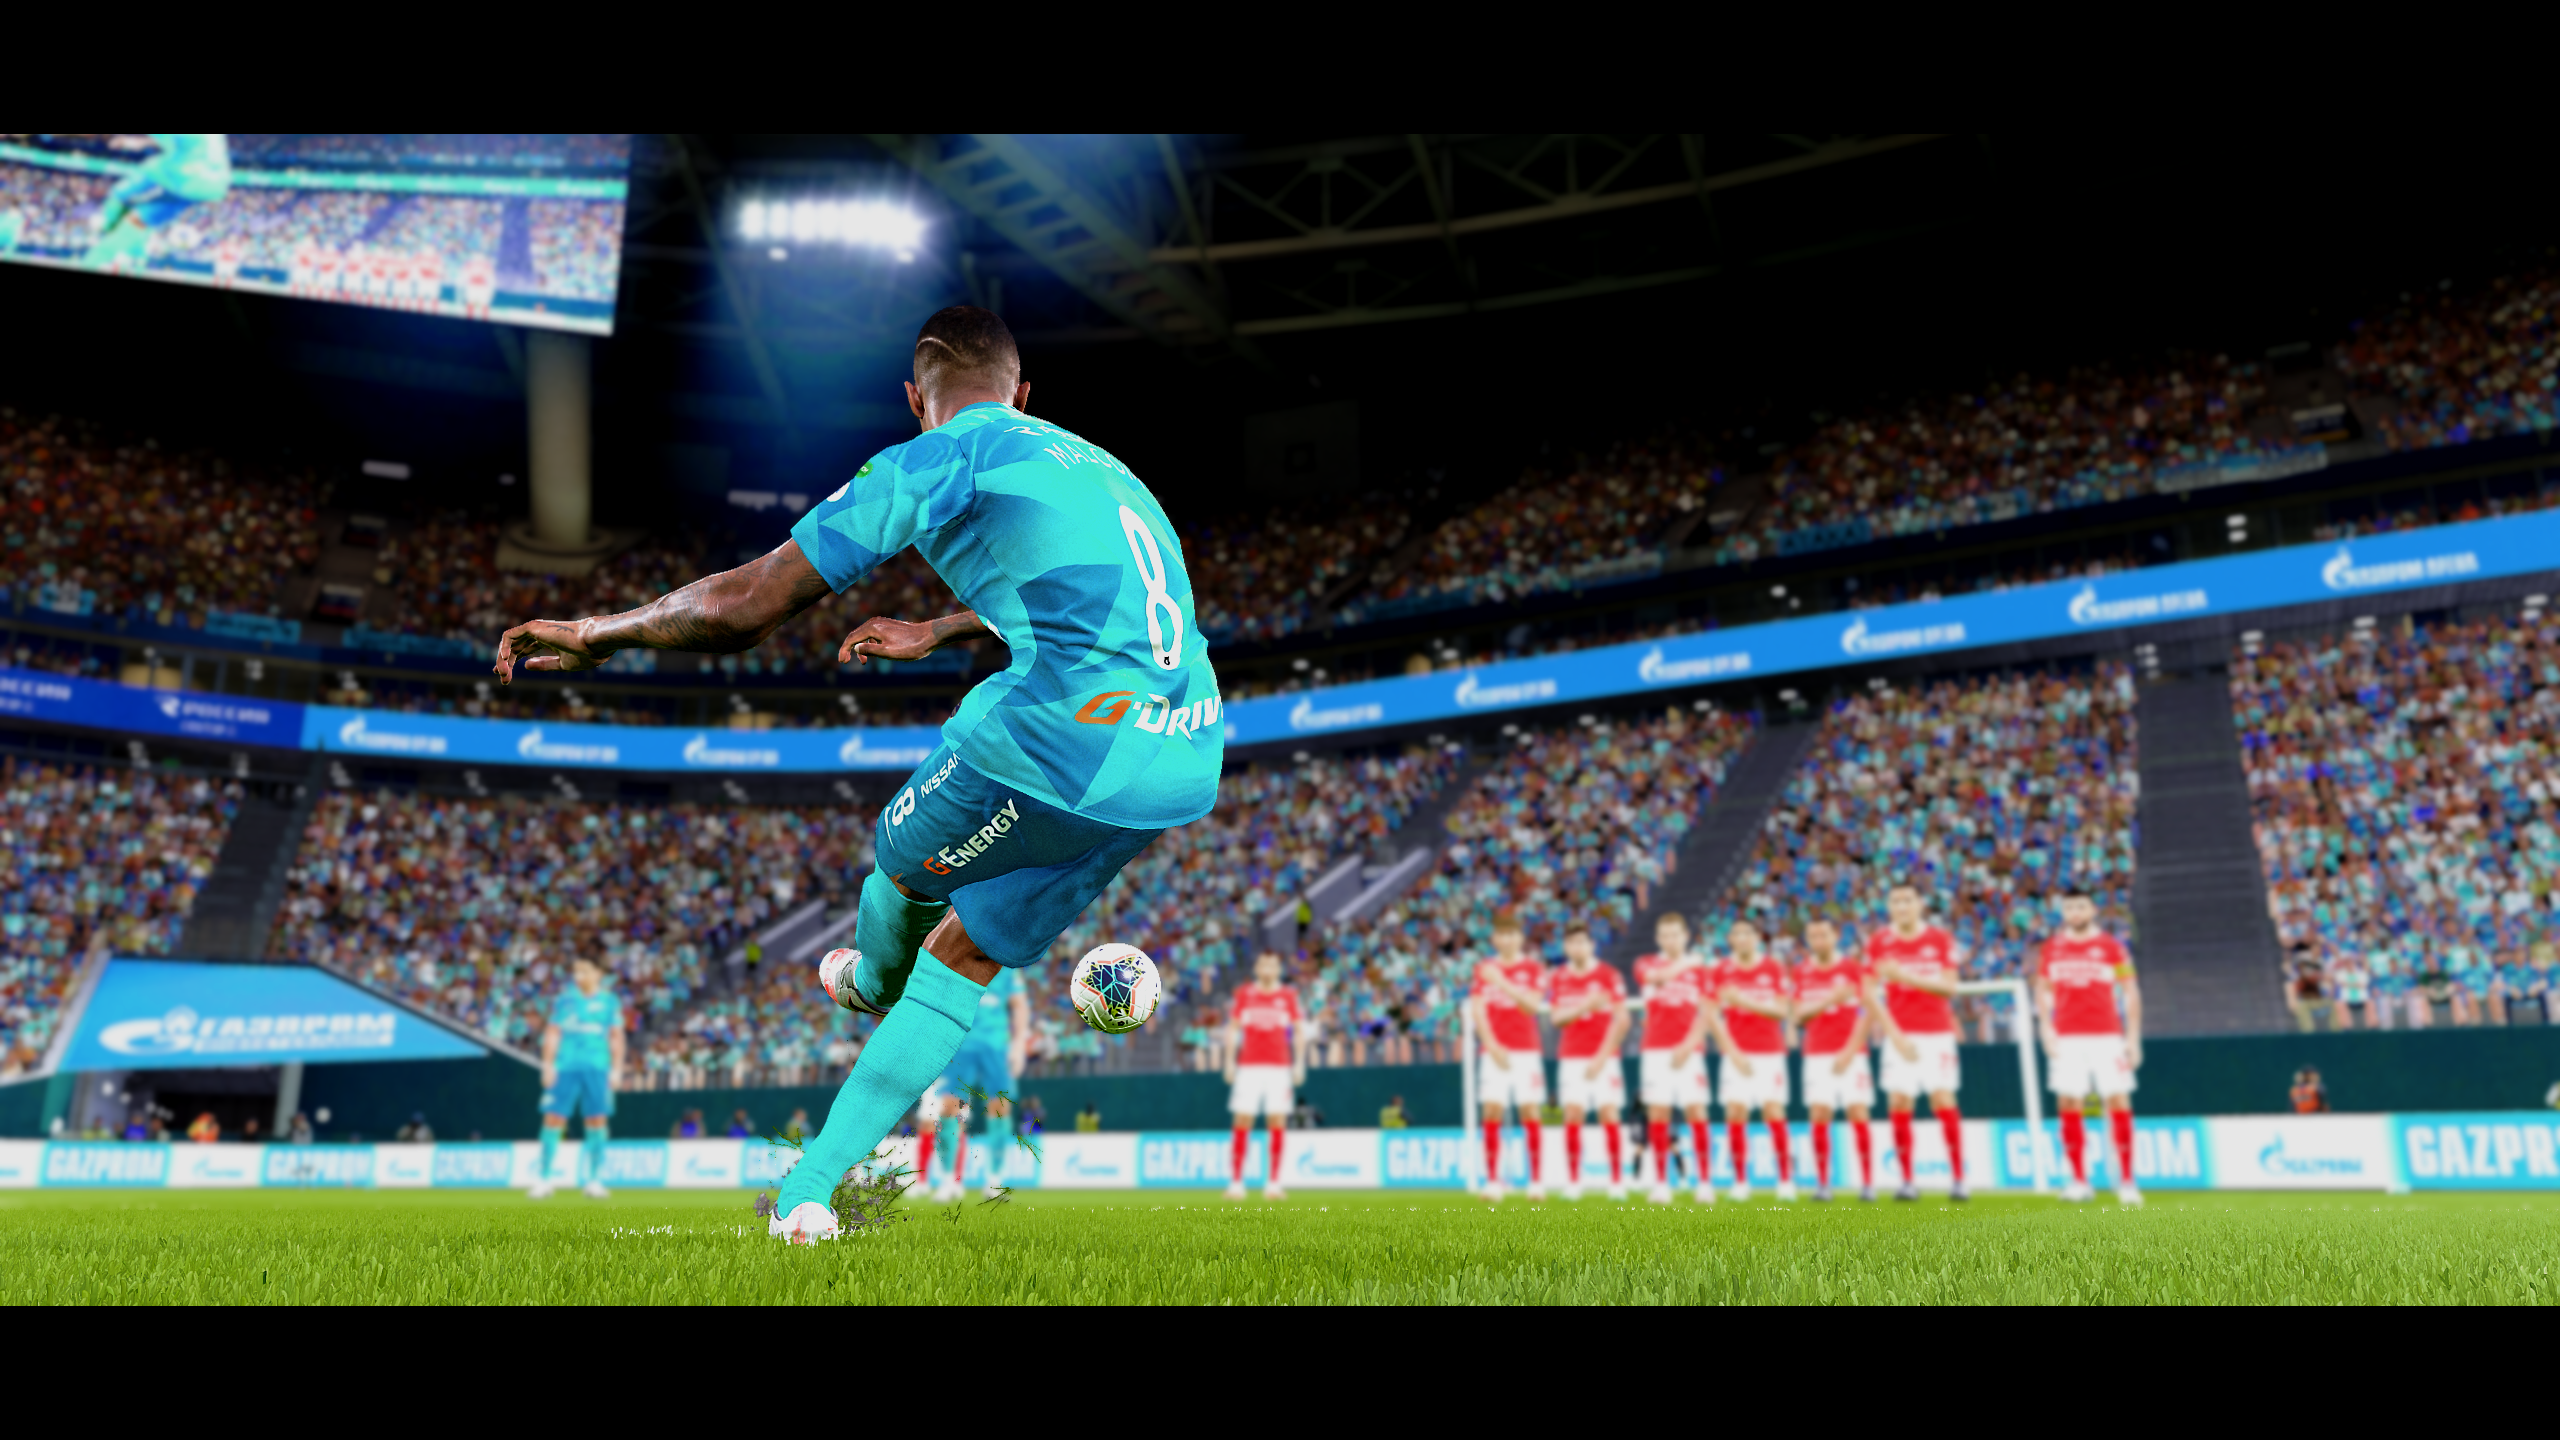 v-gry-steamapps-common-efootball-pes-2020-pes2020-exe-Screenshot-2020-06-12-01-16-18-49.png